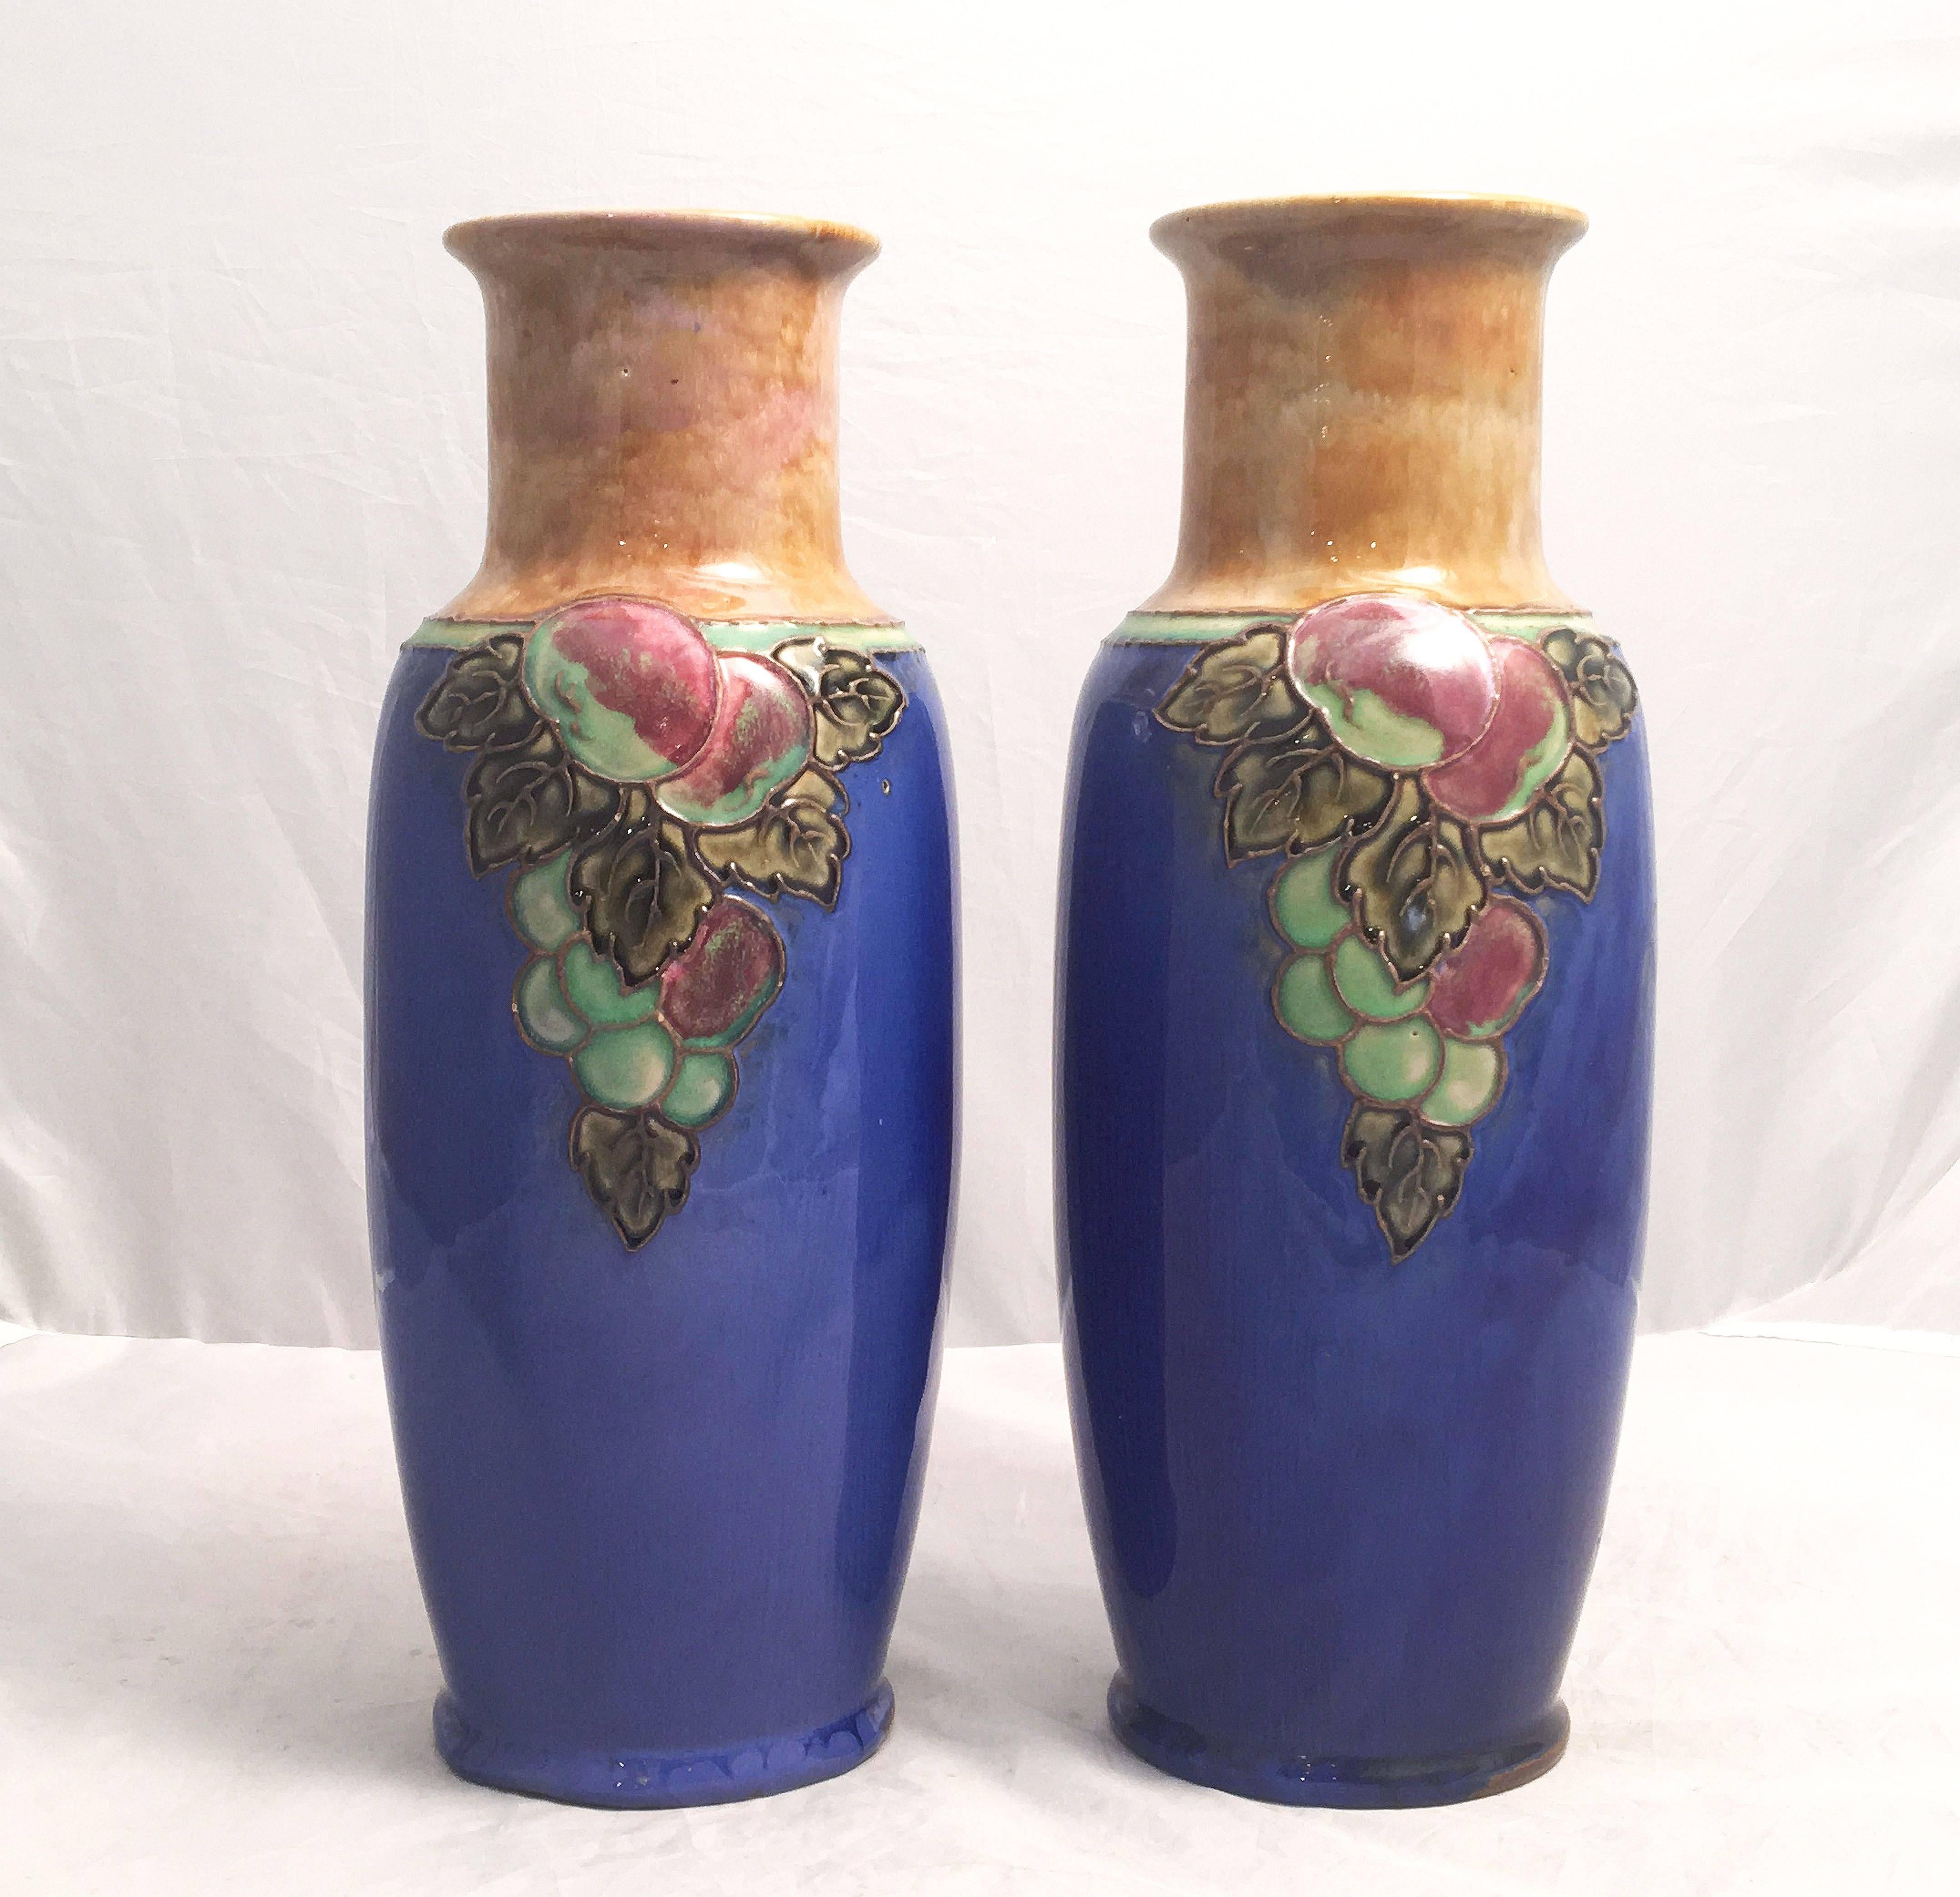 A fine pair of decorative ceramic vases from the Arts & Crafts period, by the celebrated English pottery firm, Royal Doulton.

Each vase featuring a design of grape clusters around the circumference. Impressed mark to base.

Two available -